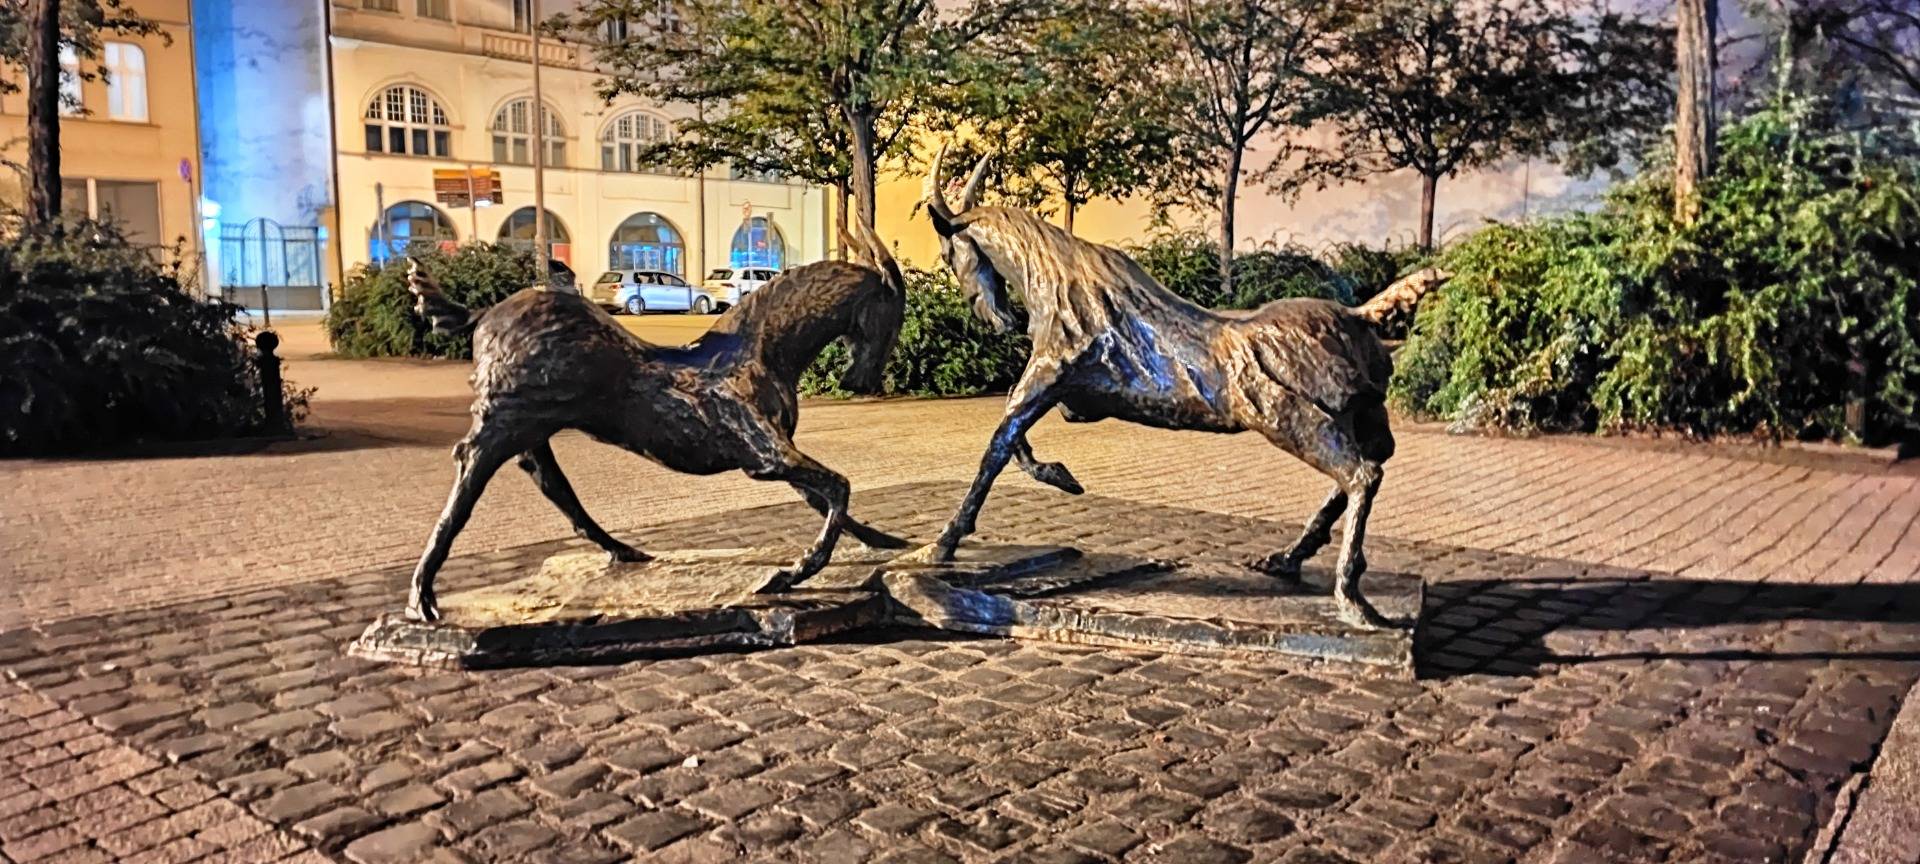 The two goats are the symbol of Poznan